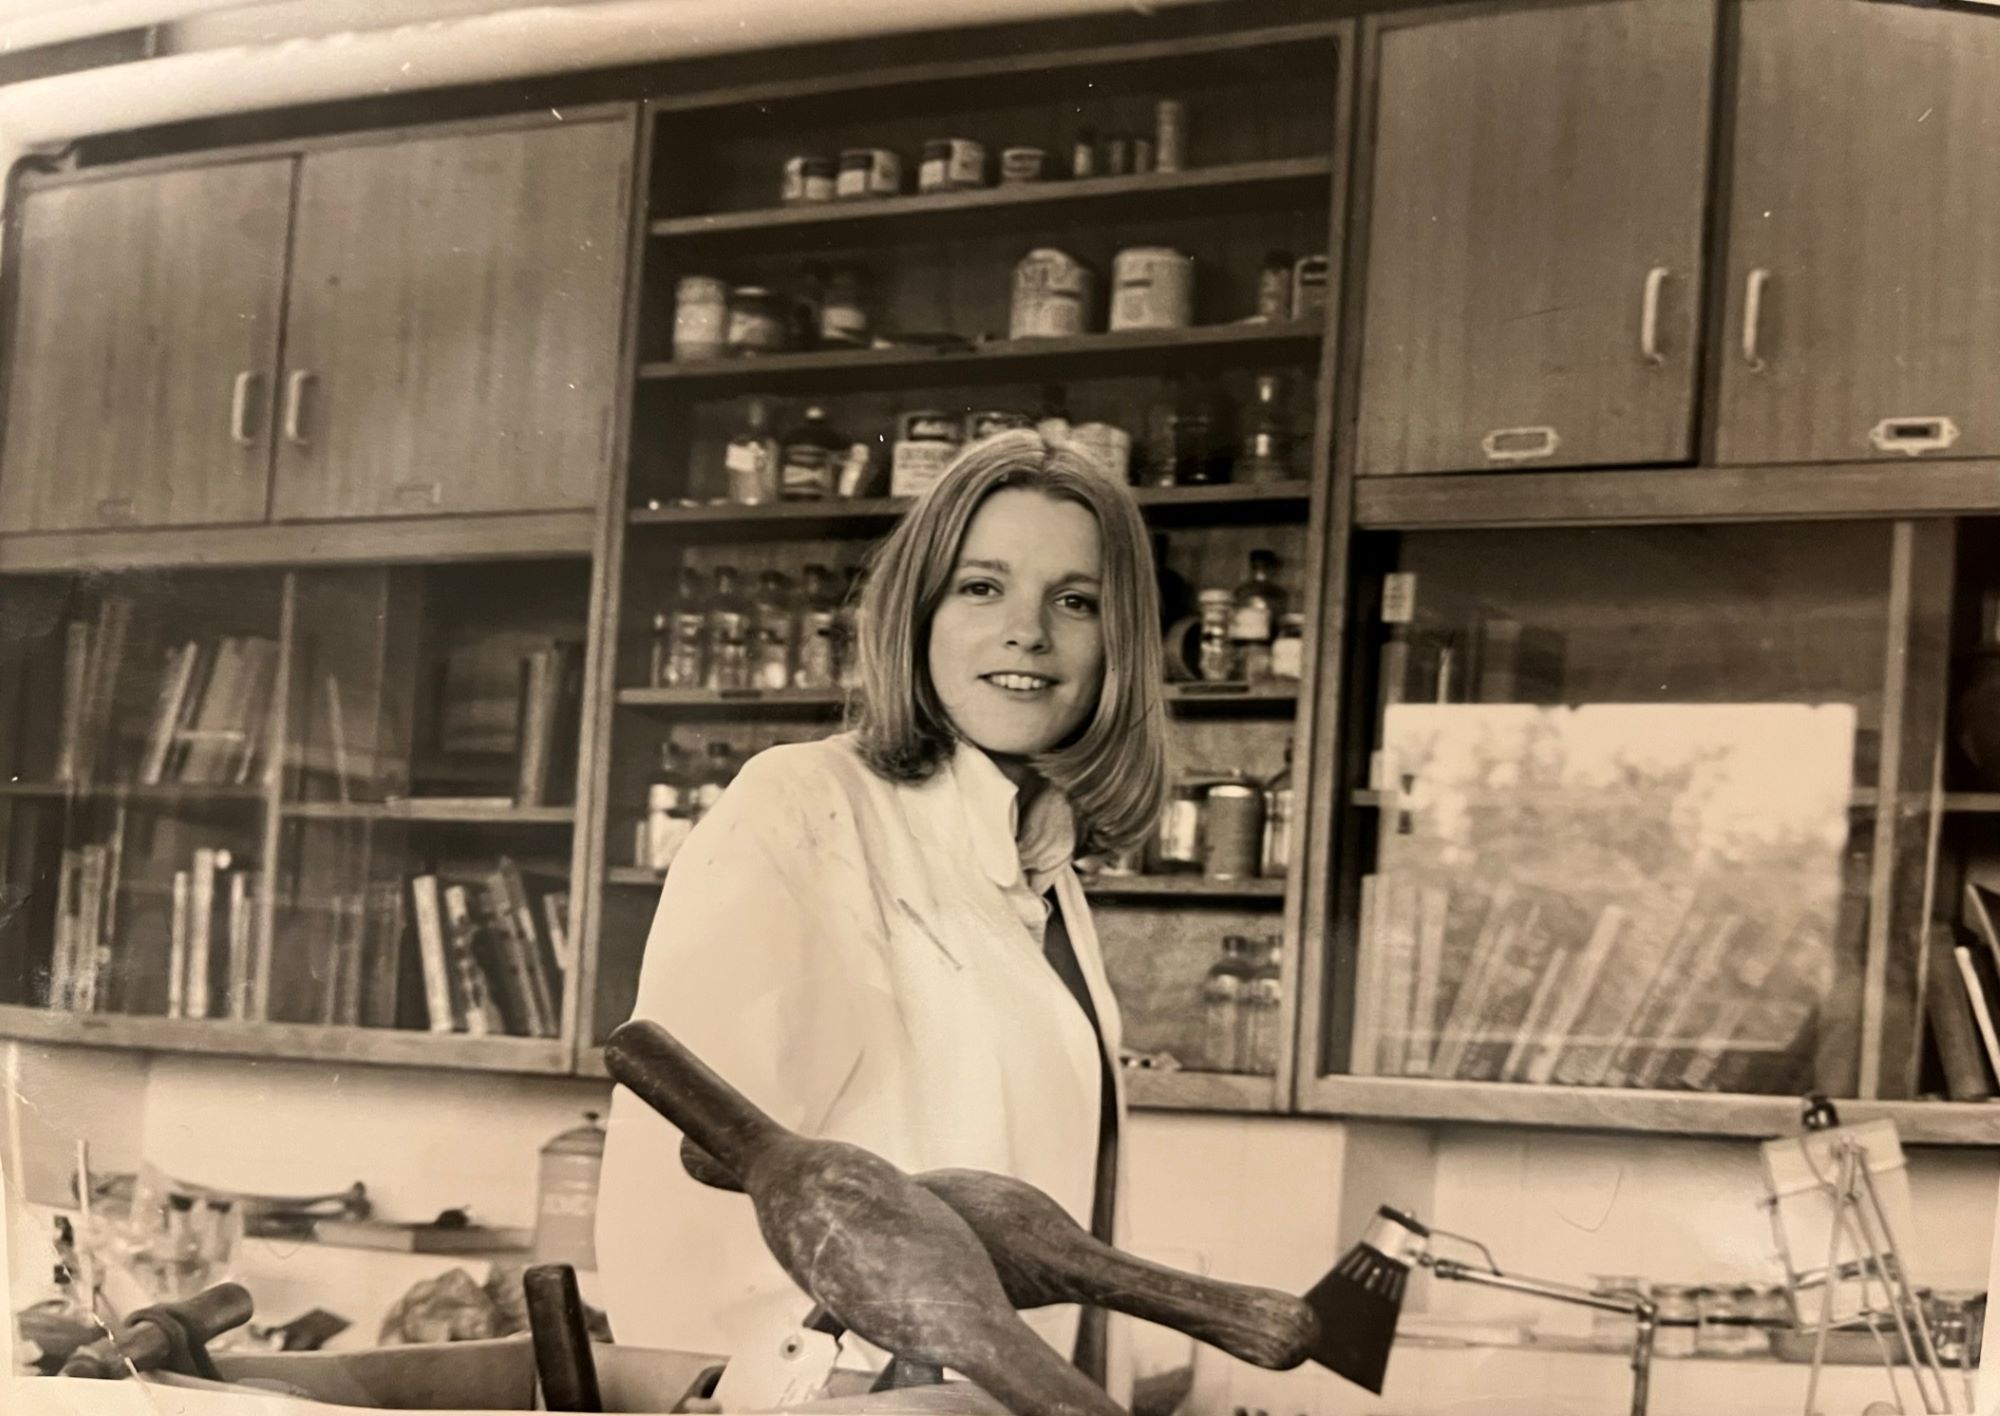 People_Pamela Pratt_Pam in the conservation lab at the Institute of Archaeology, c. 1970. CREDIT Courtesy of UCL Institute of Archaeology.jpg